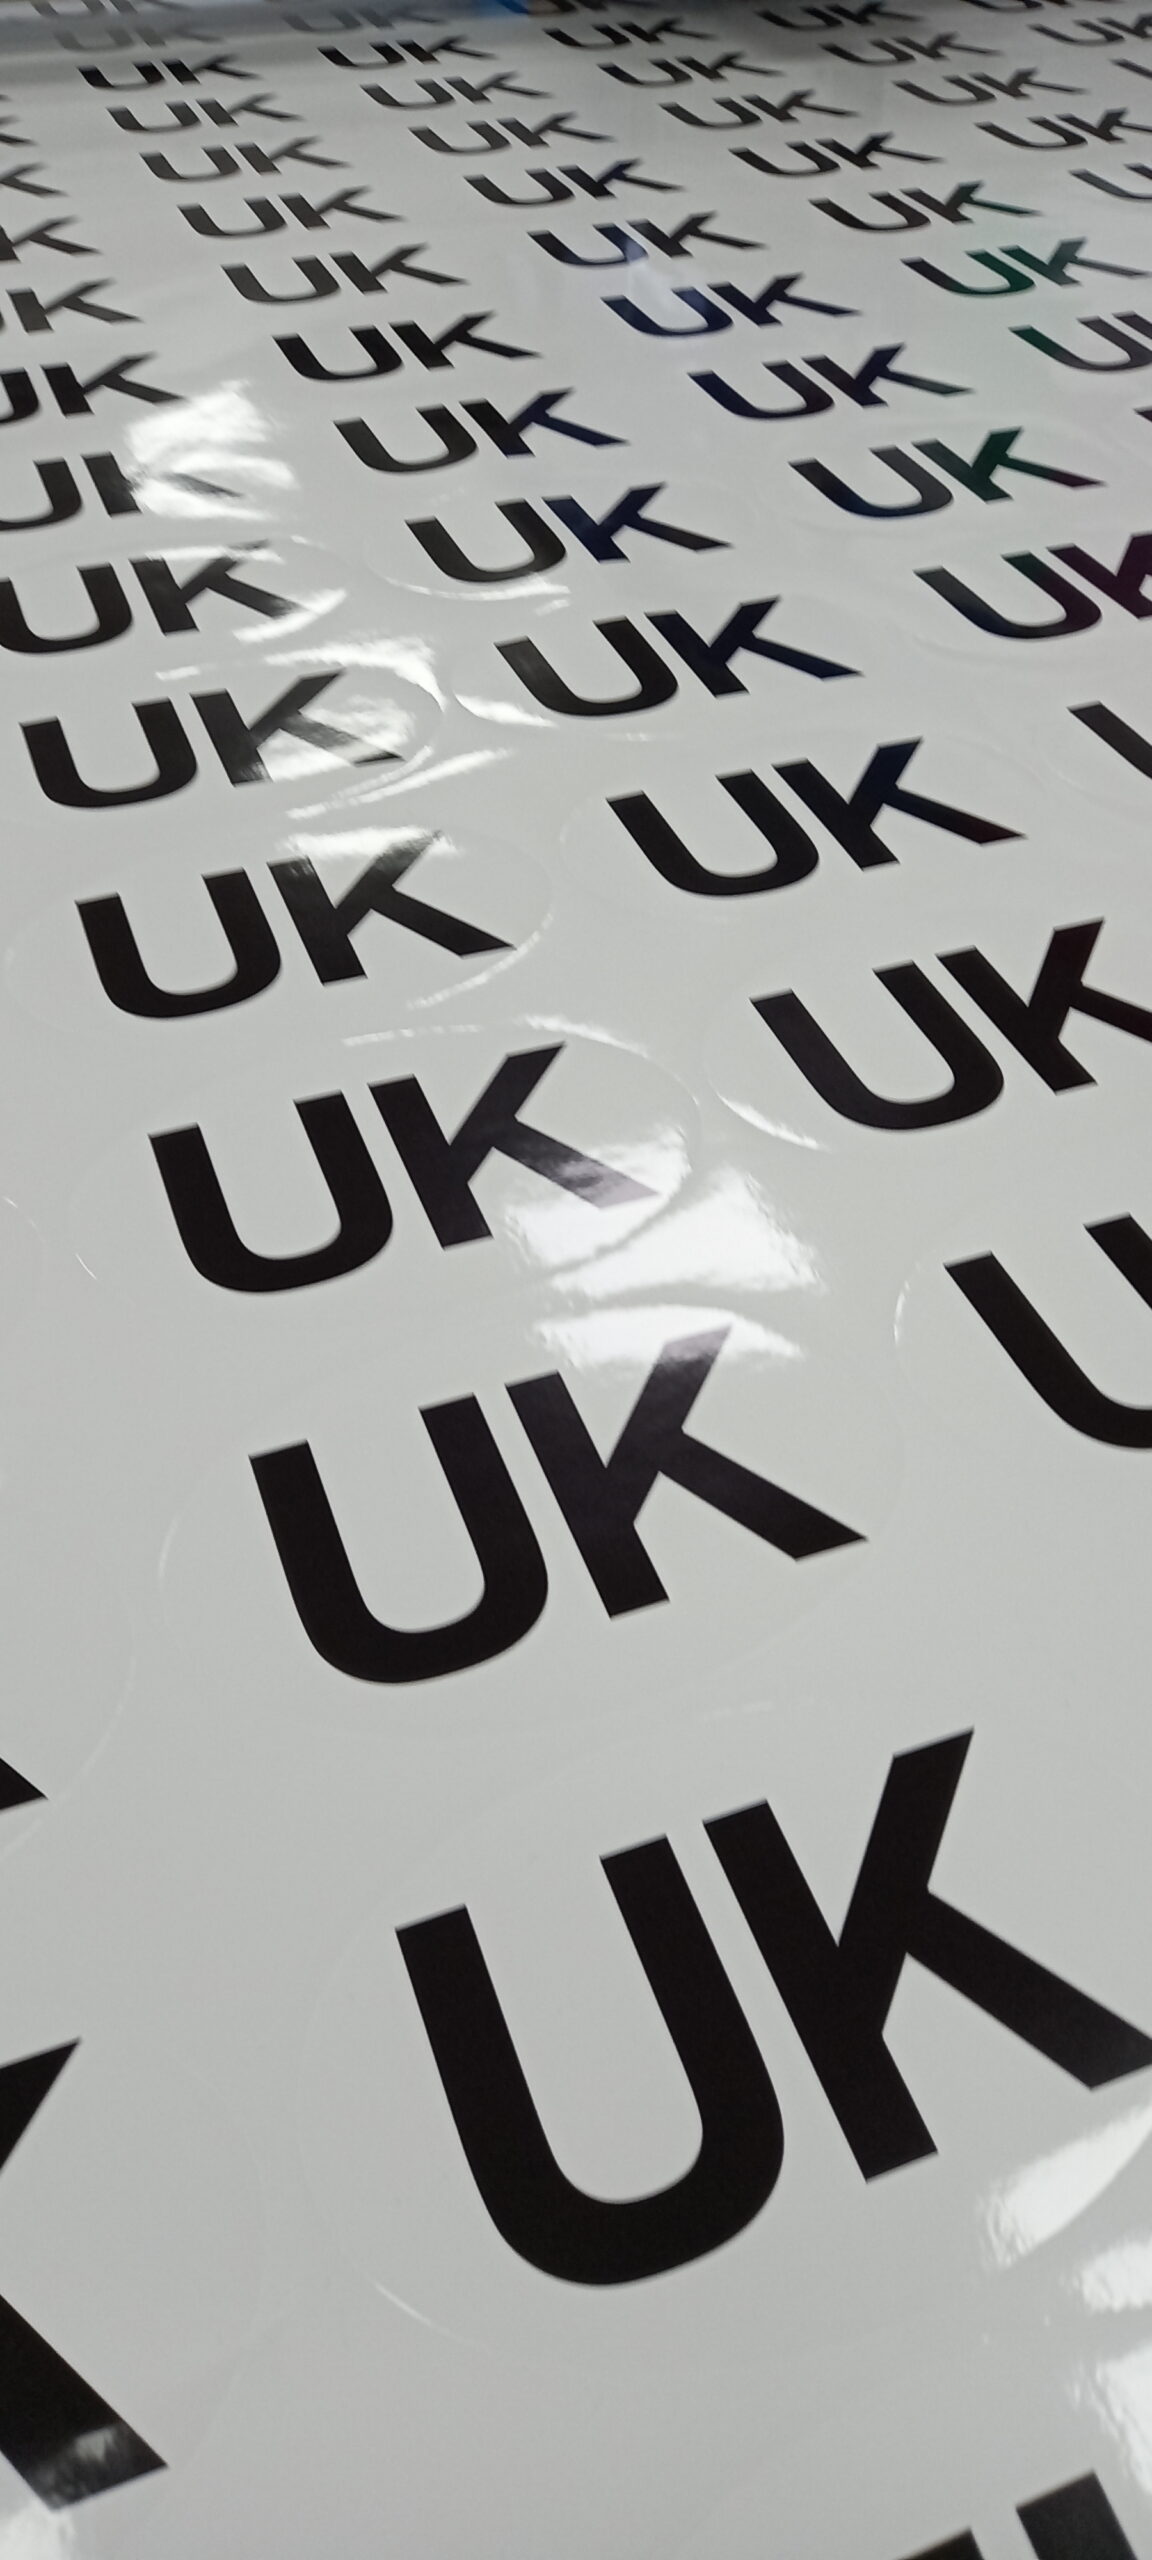 Using UK Stickers on cars when travelling abroad